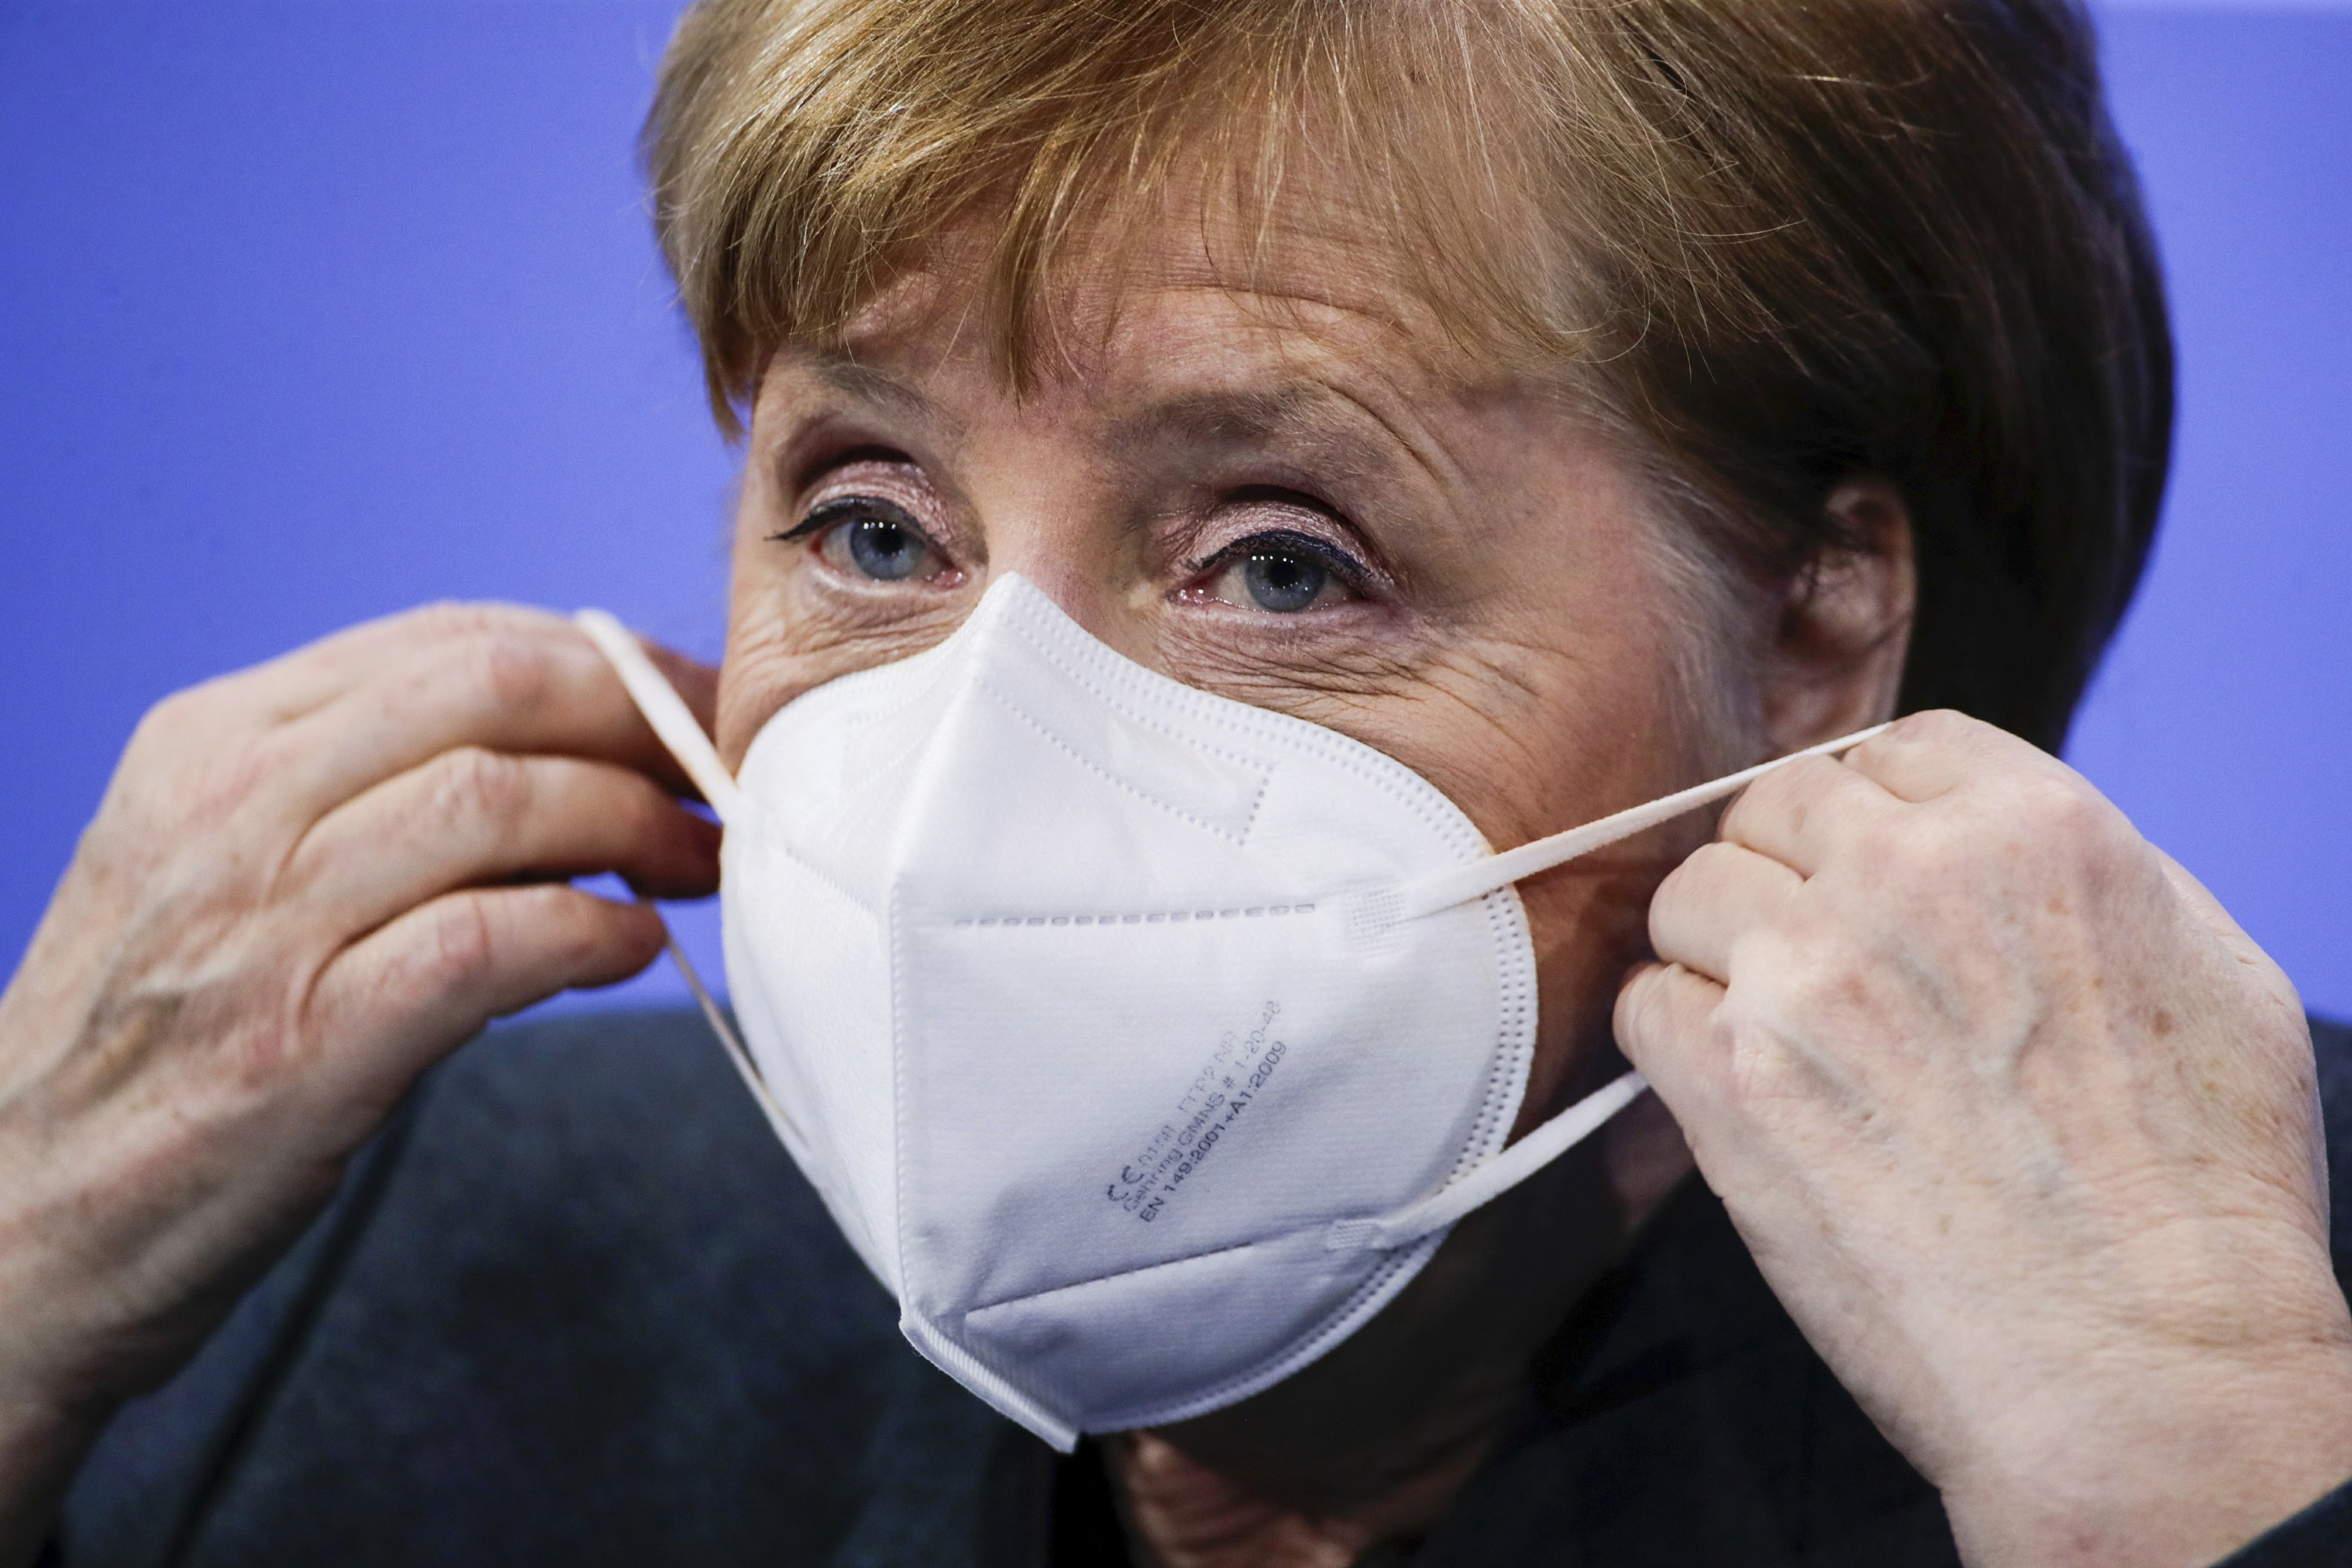 Germany to extend virus outage until mid-February